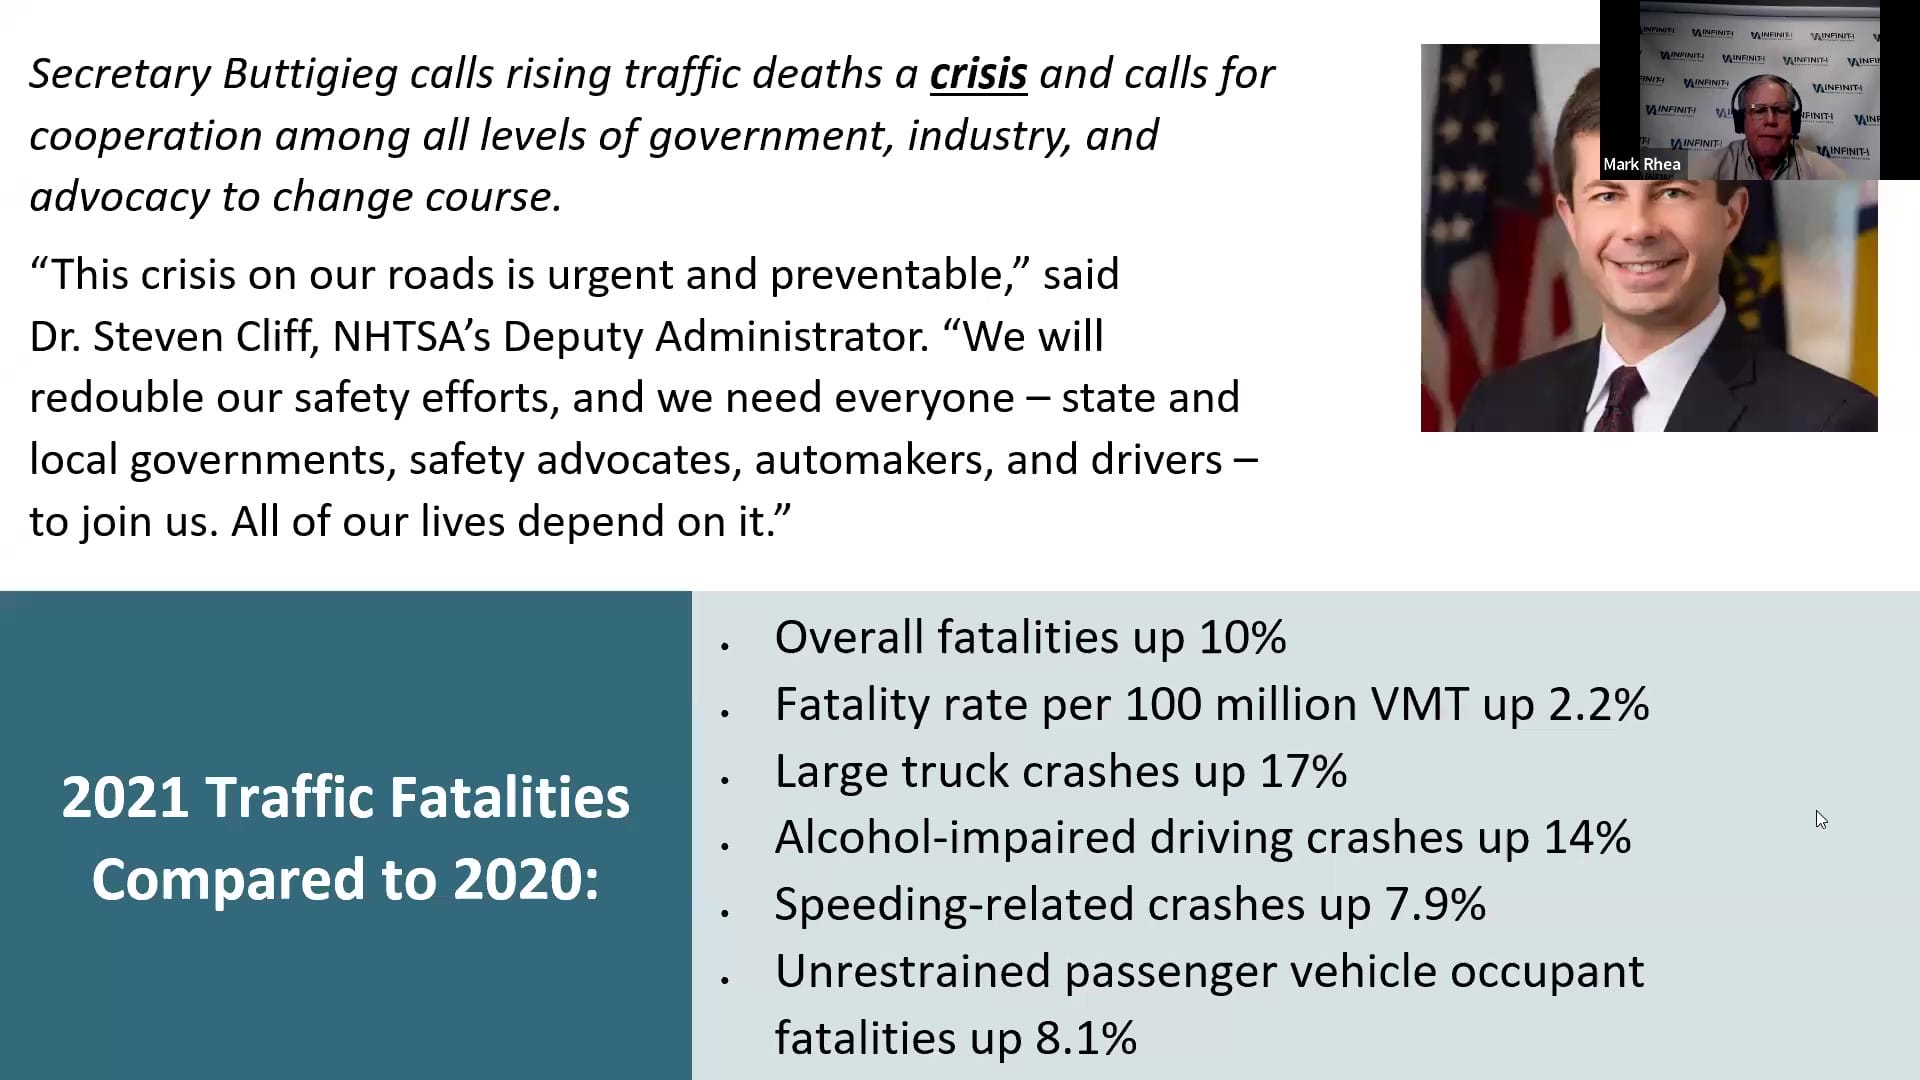 2021 Traffic Fatalities Compared to 2020